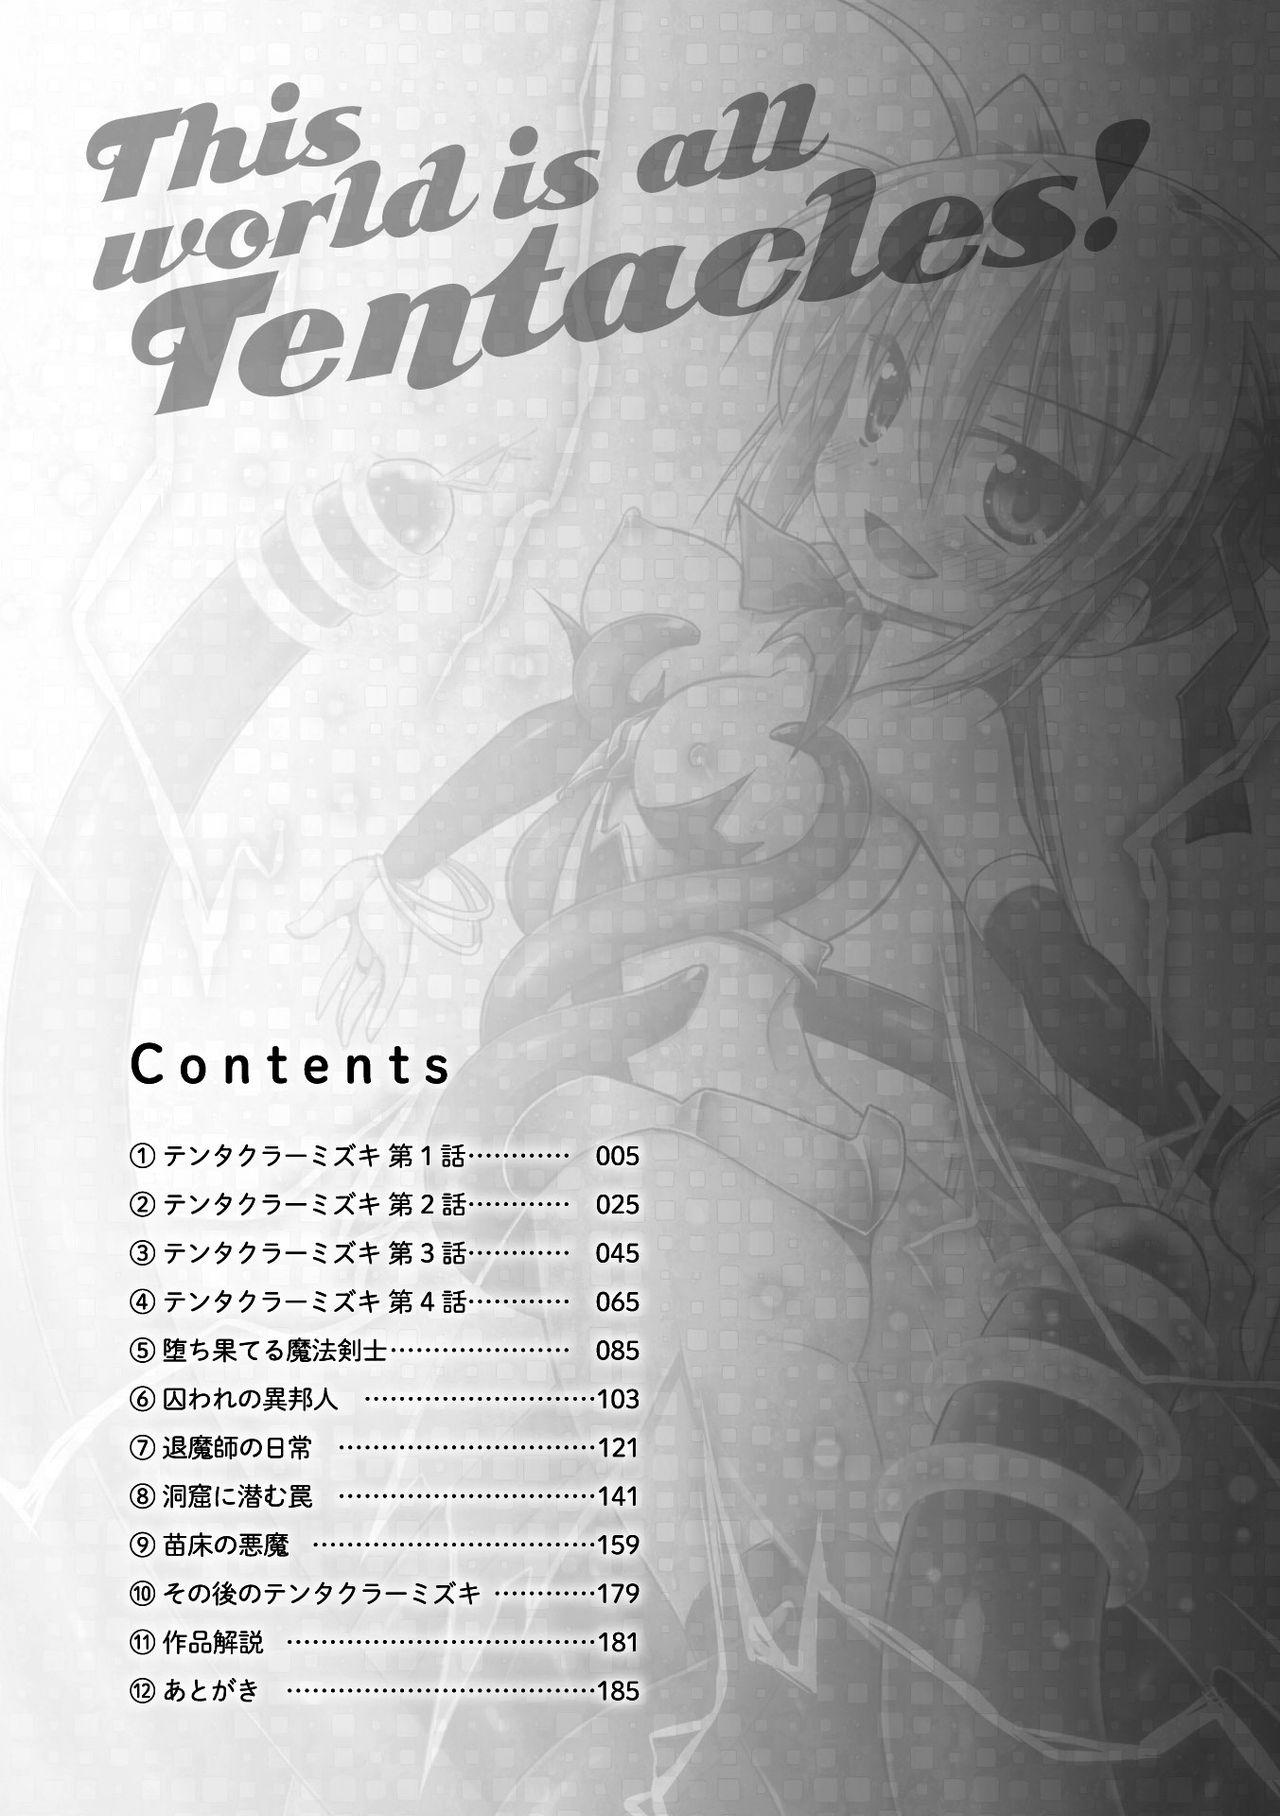 Harcore This World is all Tentacles | Konoyo wa Subete Tentacle! Smooth - Page 4